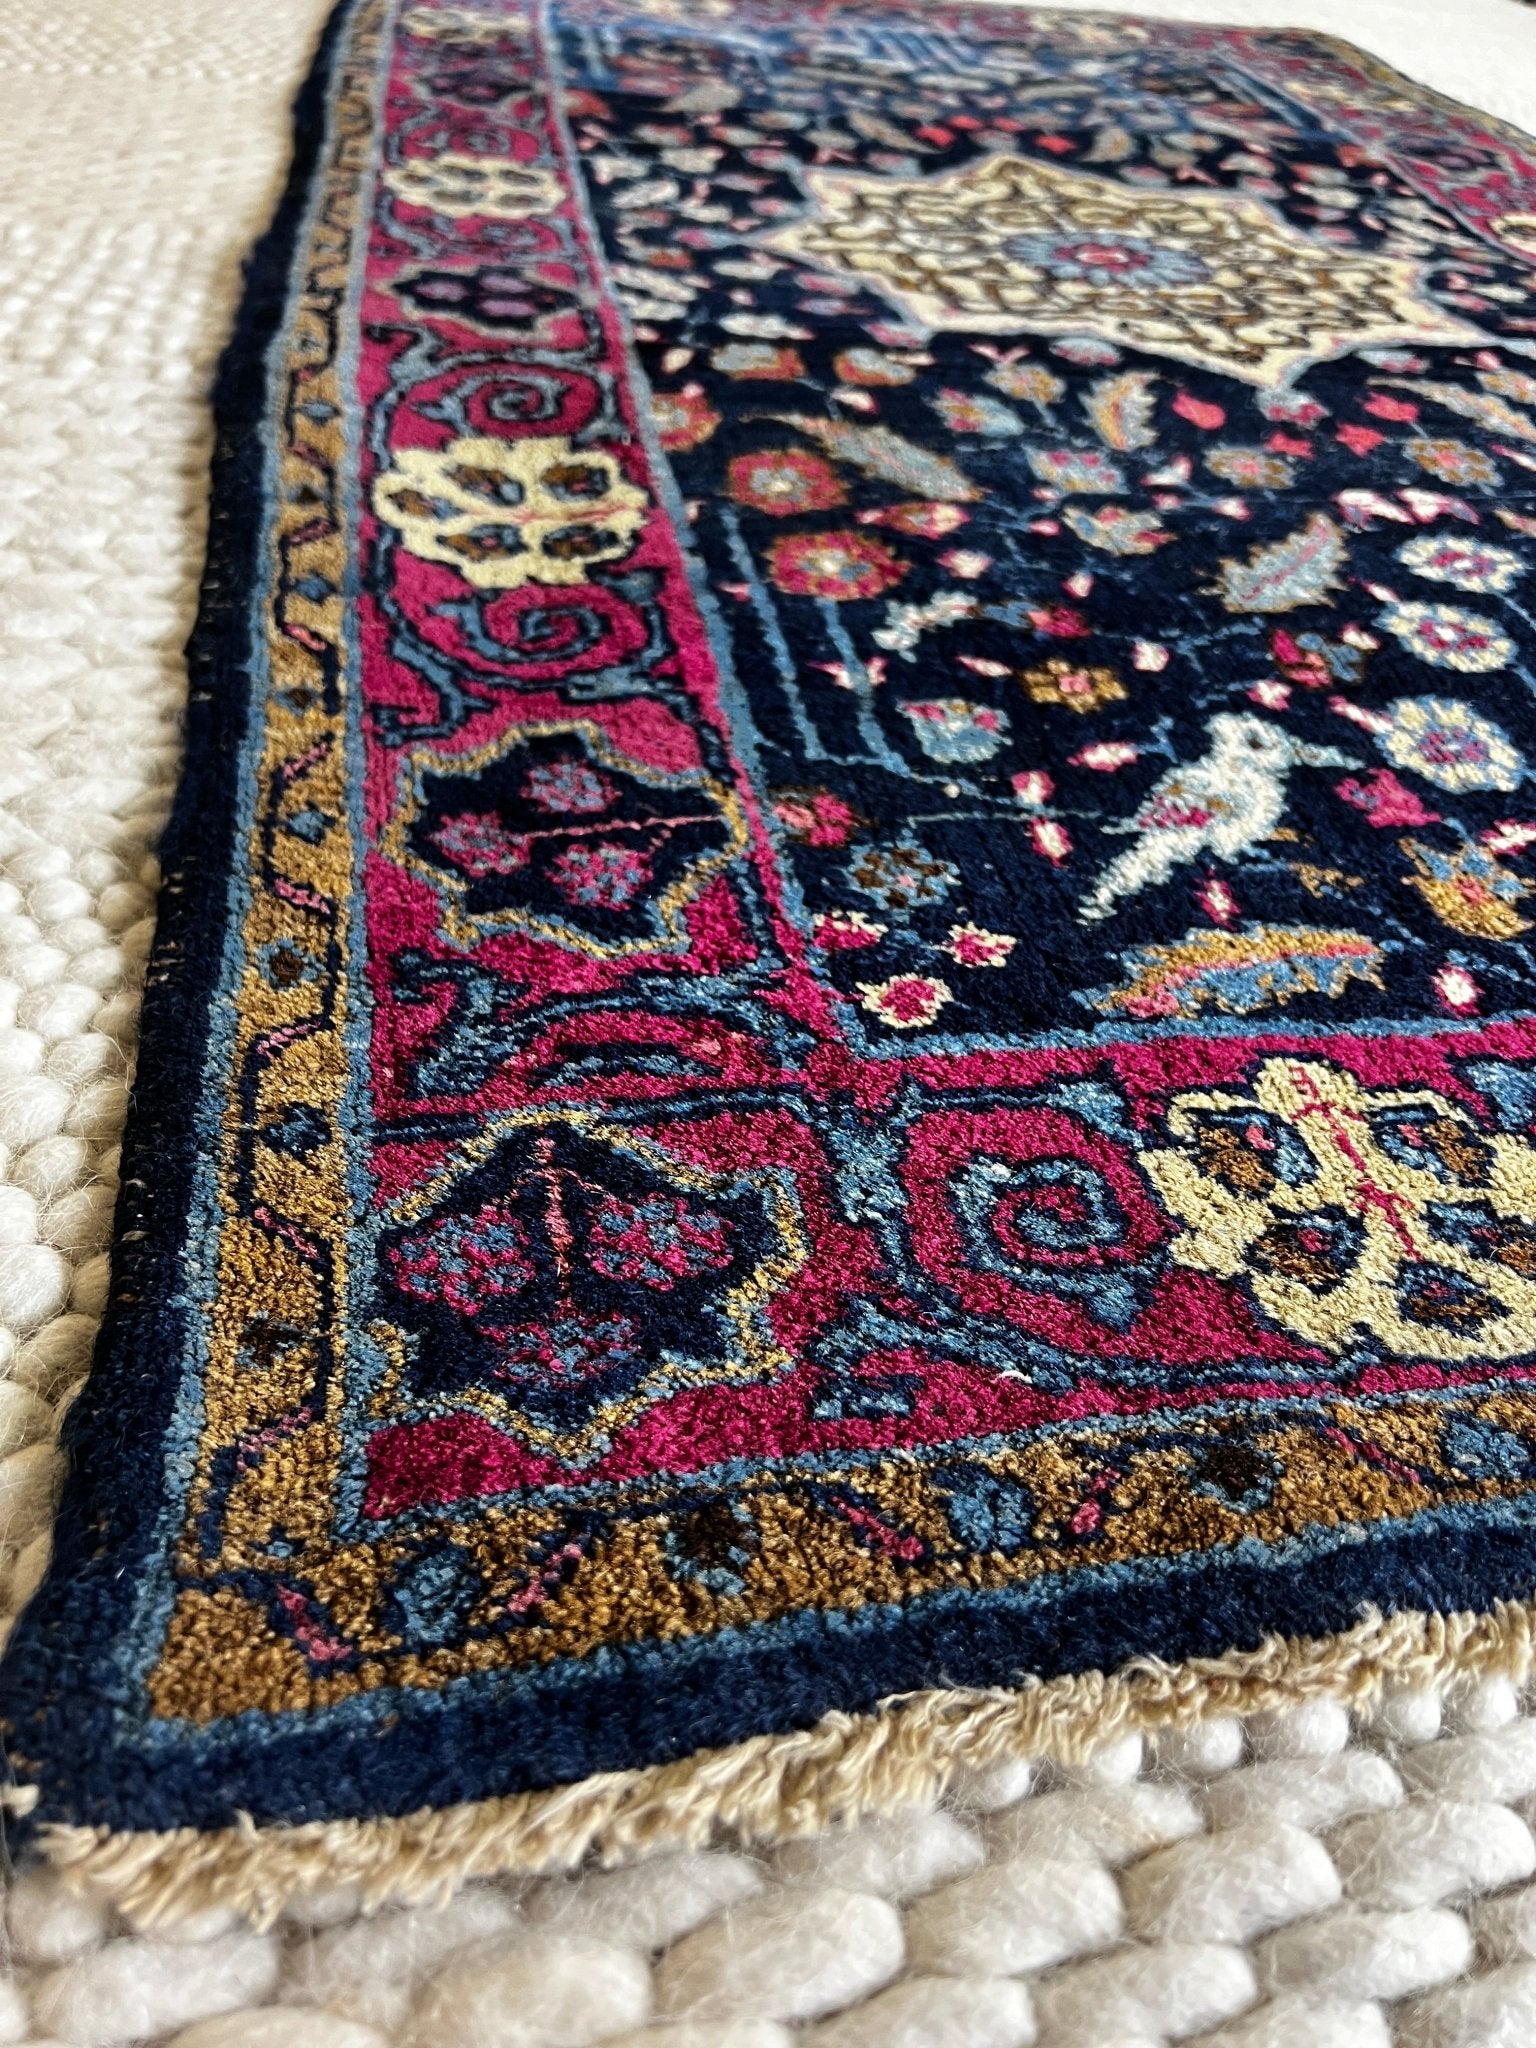 Fine Semi-Antique 2.6x5 Yazd Central Persian Rug Red and Blue | Banana Manor Rug Factory Outlet